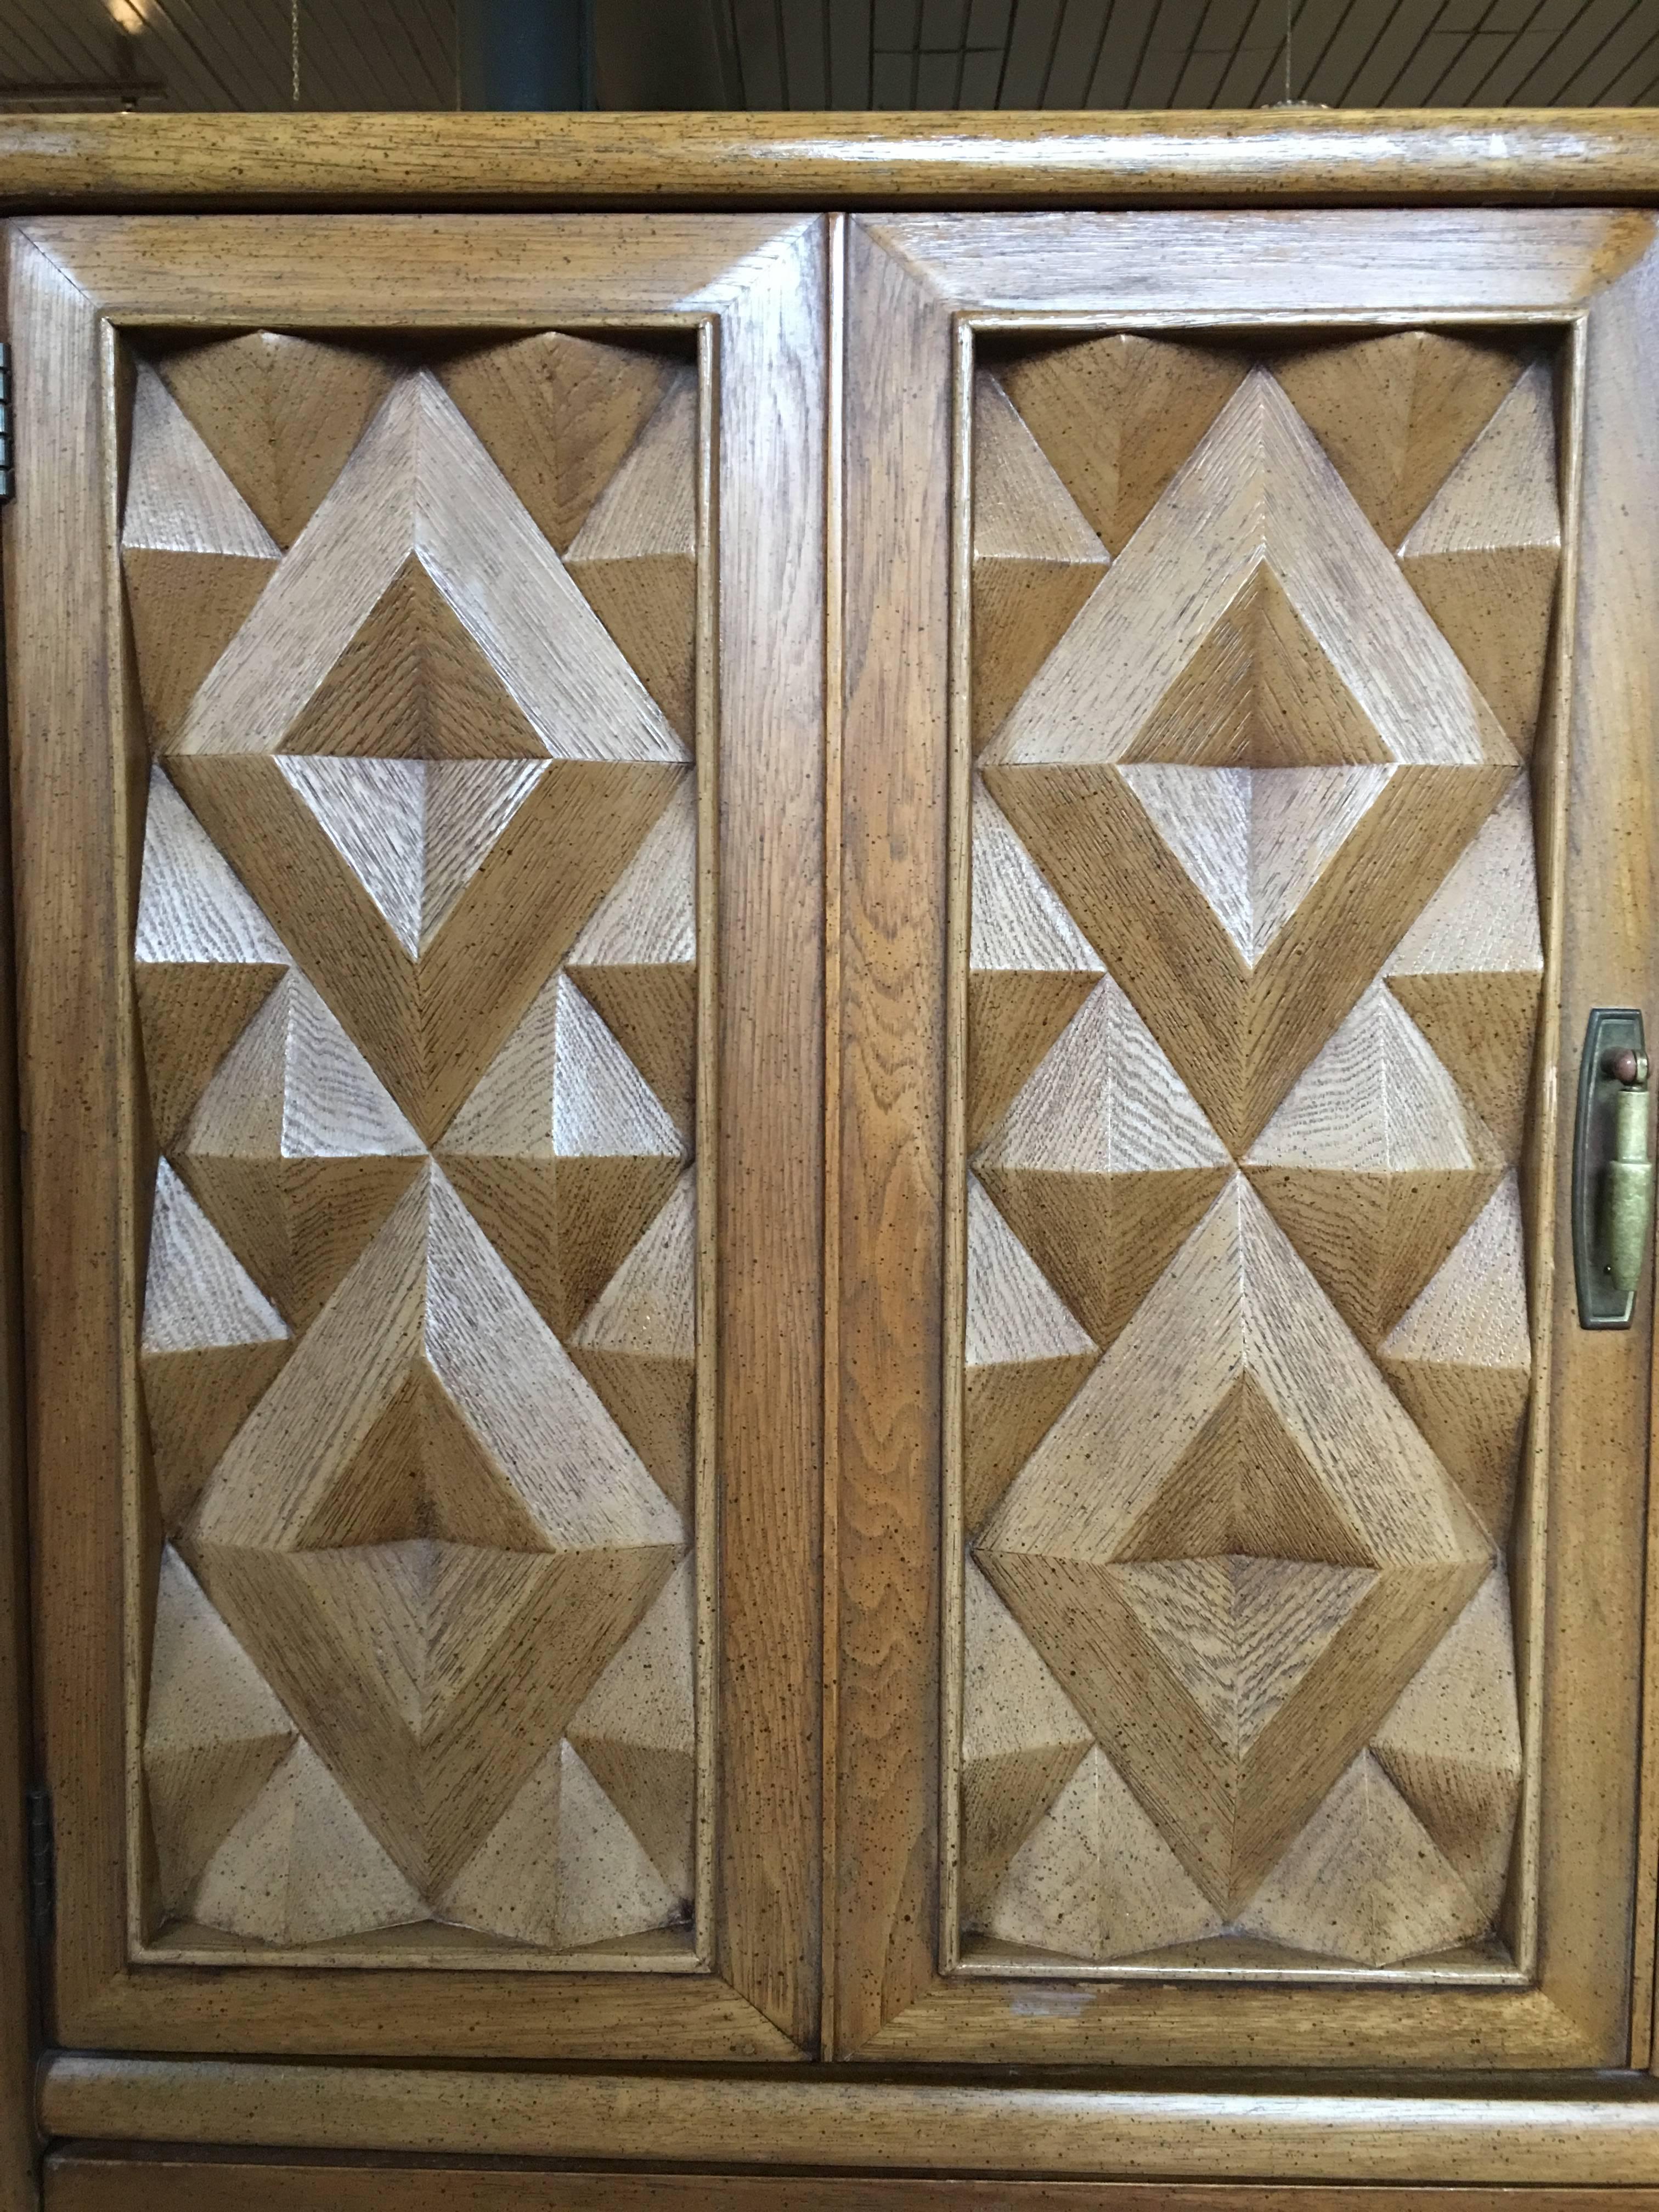 Mid-Century Modern Diamond Head armoire cabinet by Broyhill Premier. Beautiful and sculptural, this case piece features a unique geometric cubist pattern in natural pecan tones and original brass hardware. This brutalist style chest can be used as a